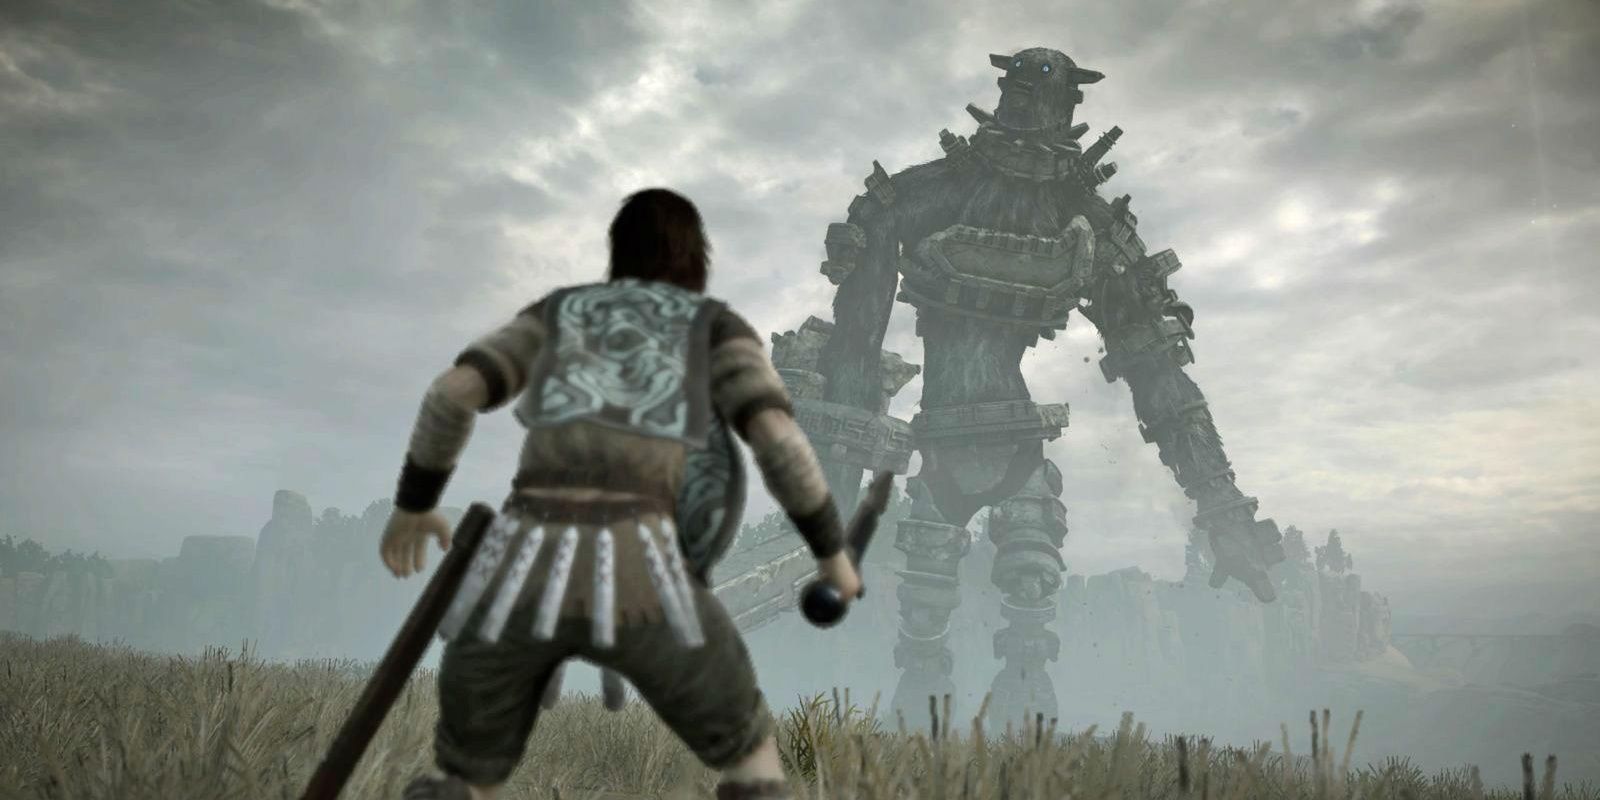 The third colossus approaches in Shadow of the Colossus